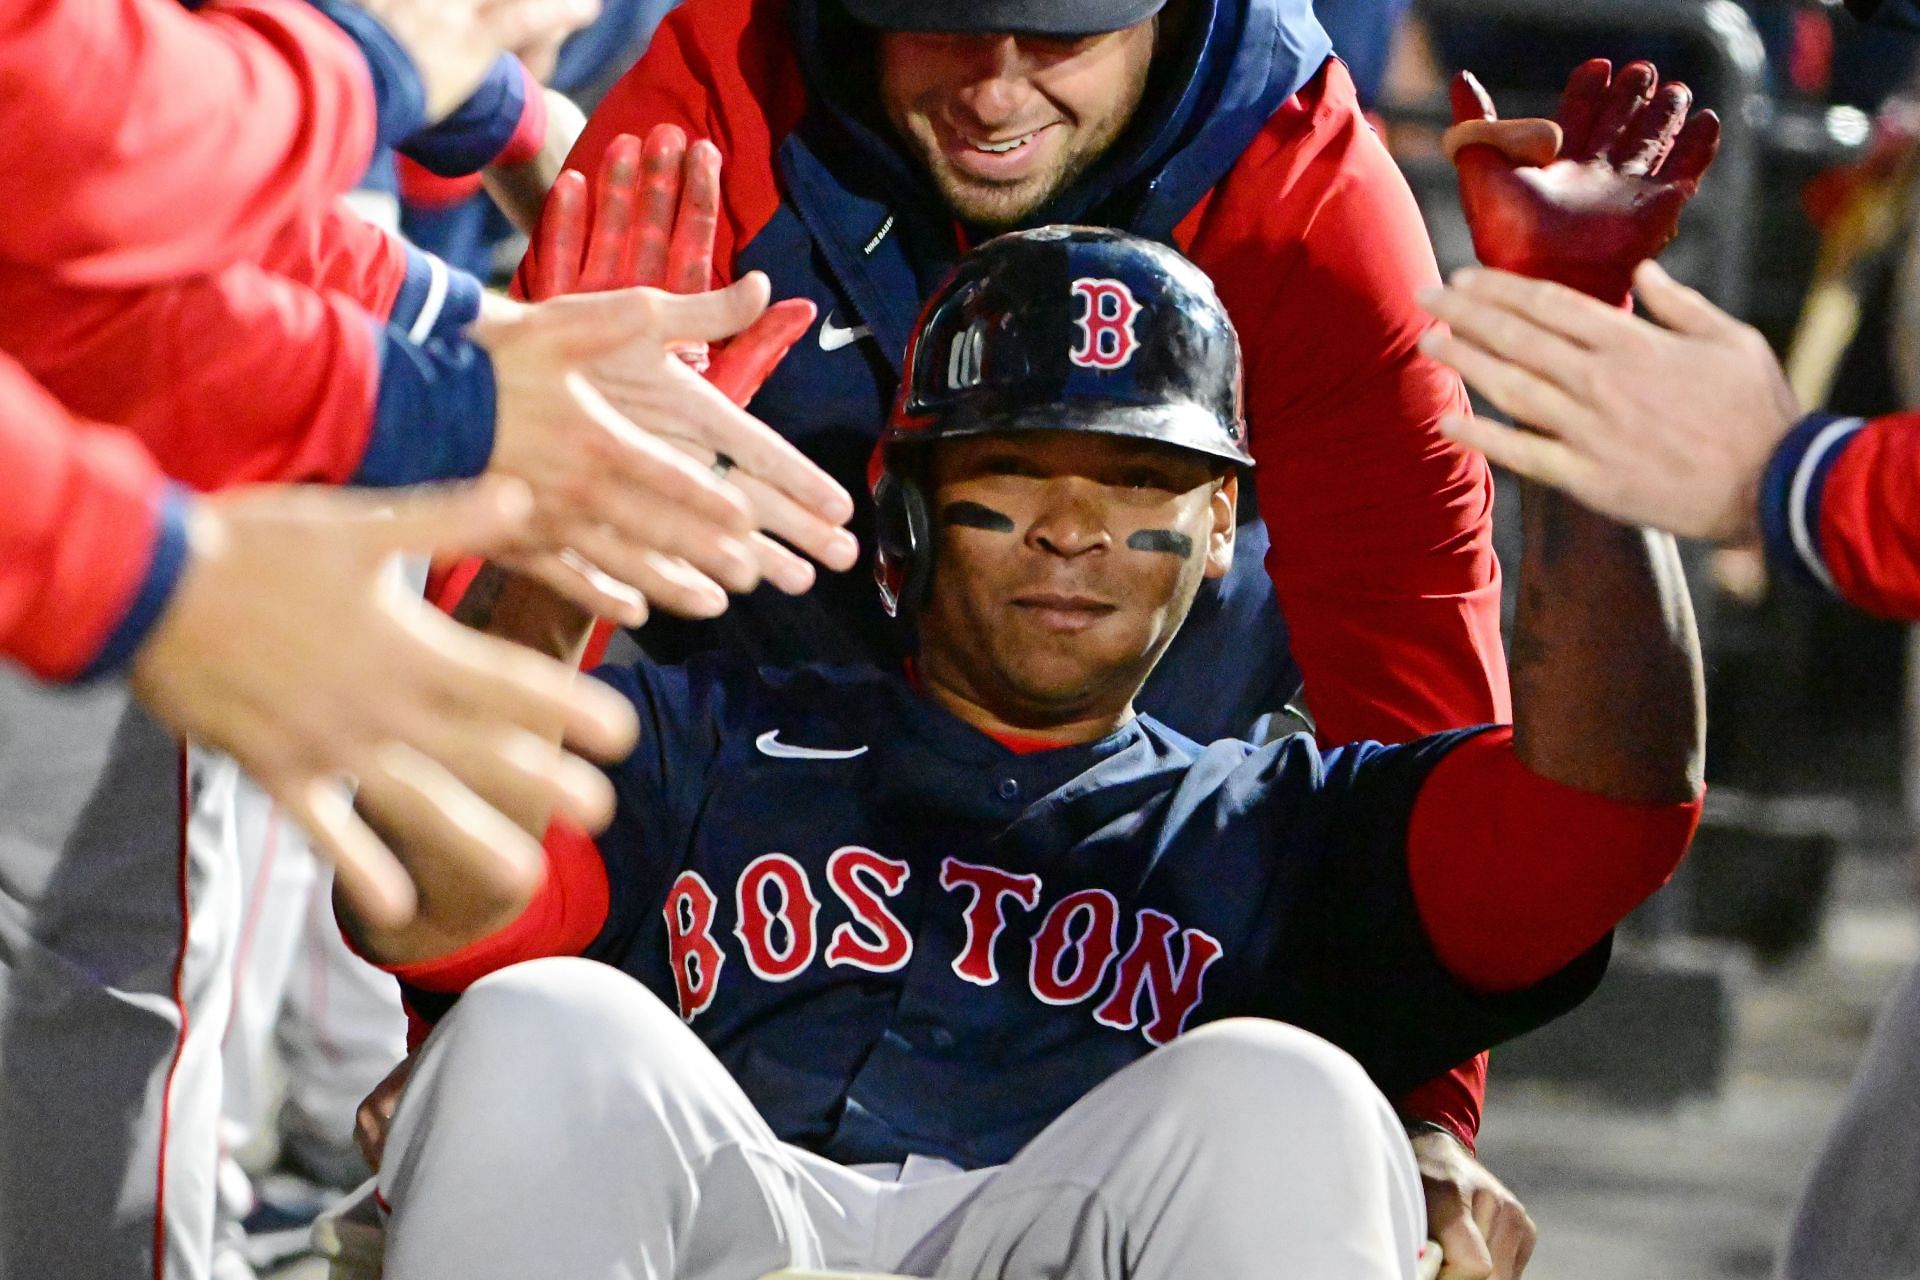 Boston Red Sox third baseman Rafael Devers has a .406 batting average over the past 15 games, helping the Red Sox slowly but surely climb the AL East standings